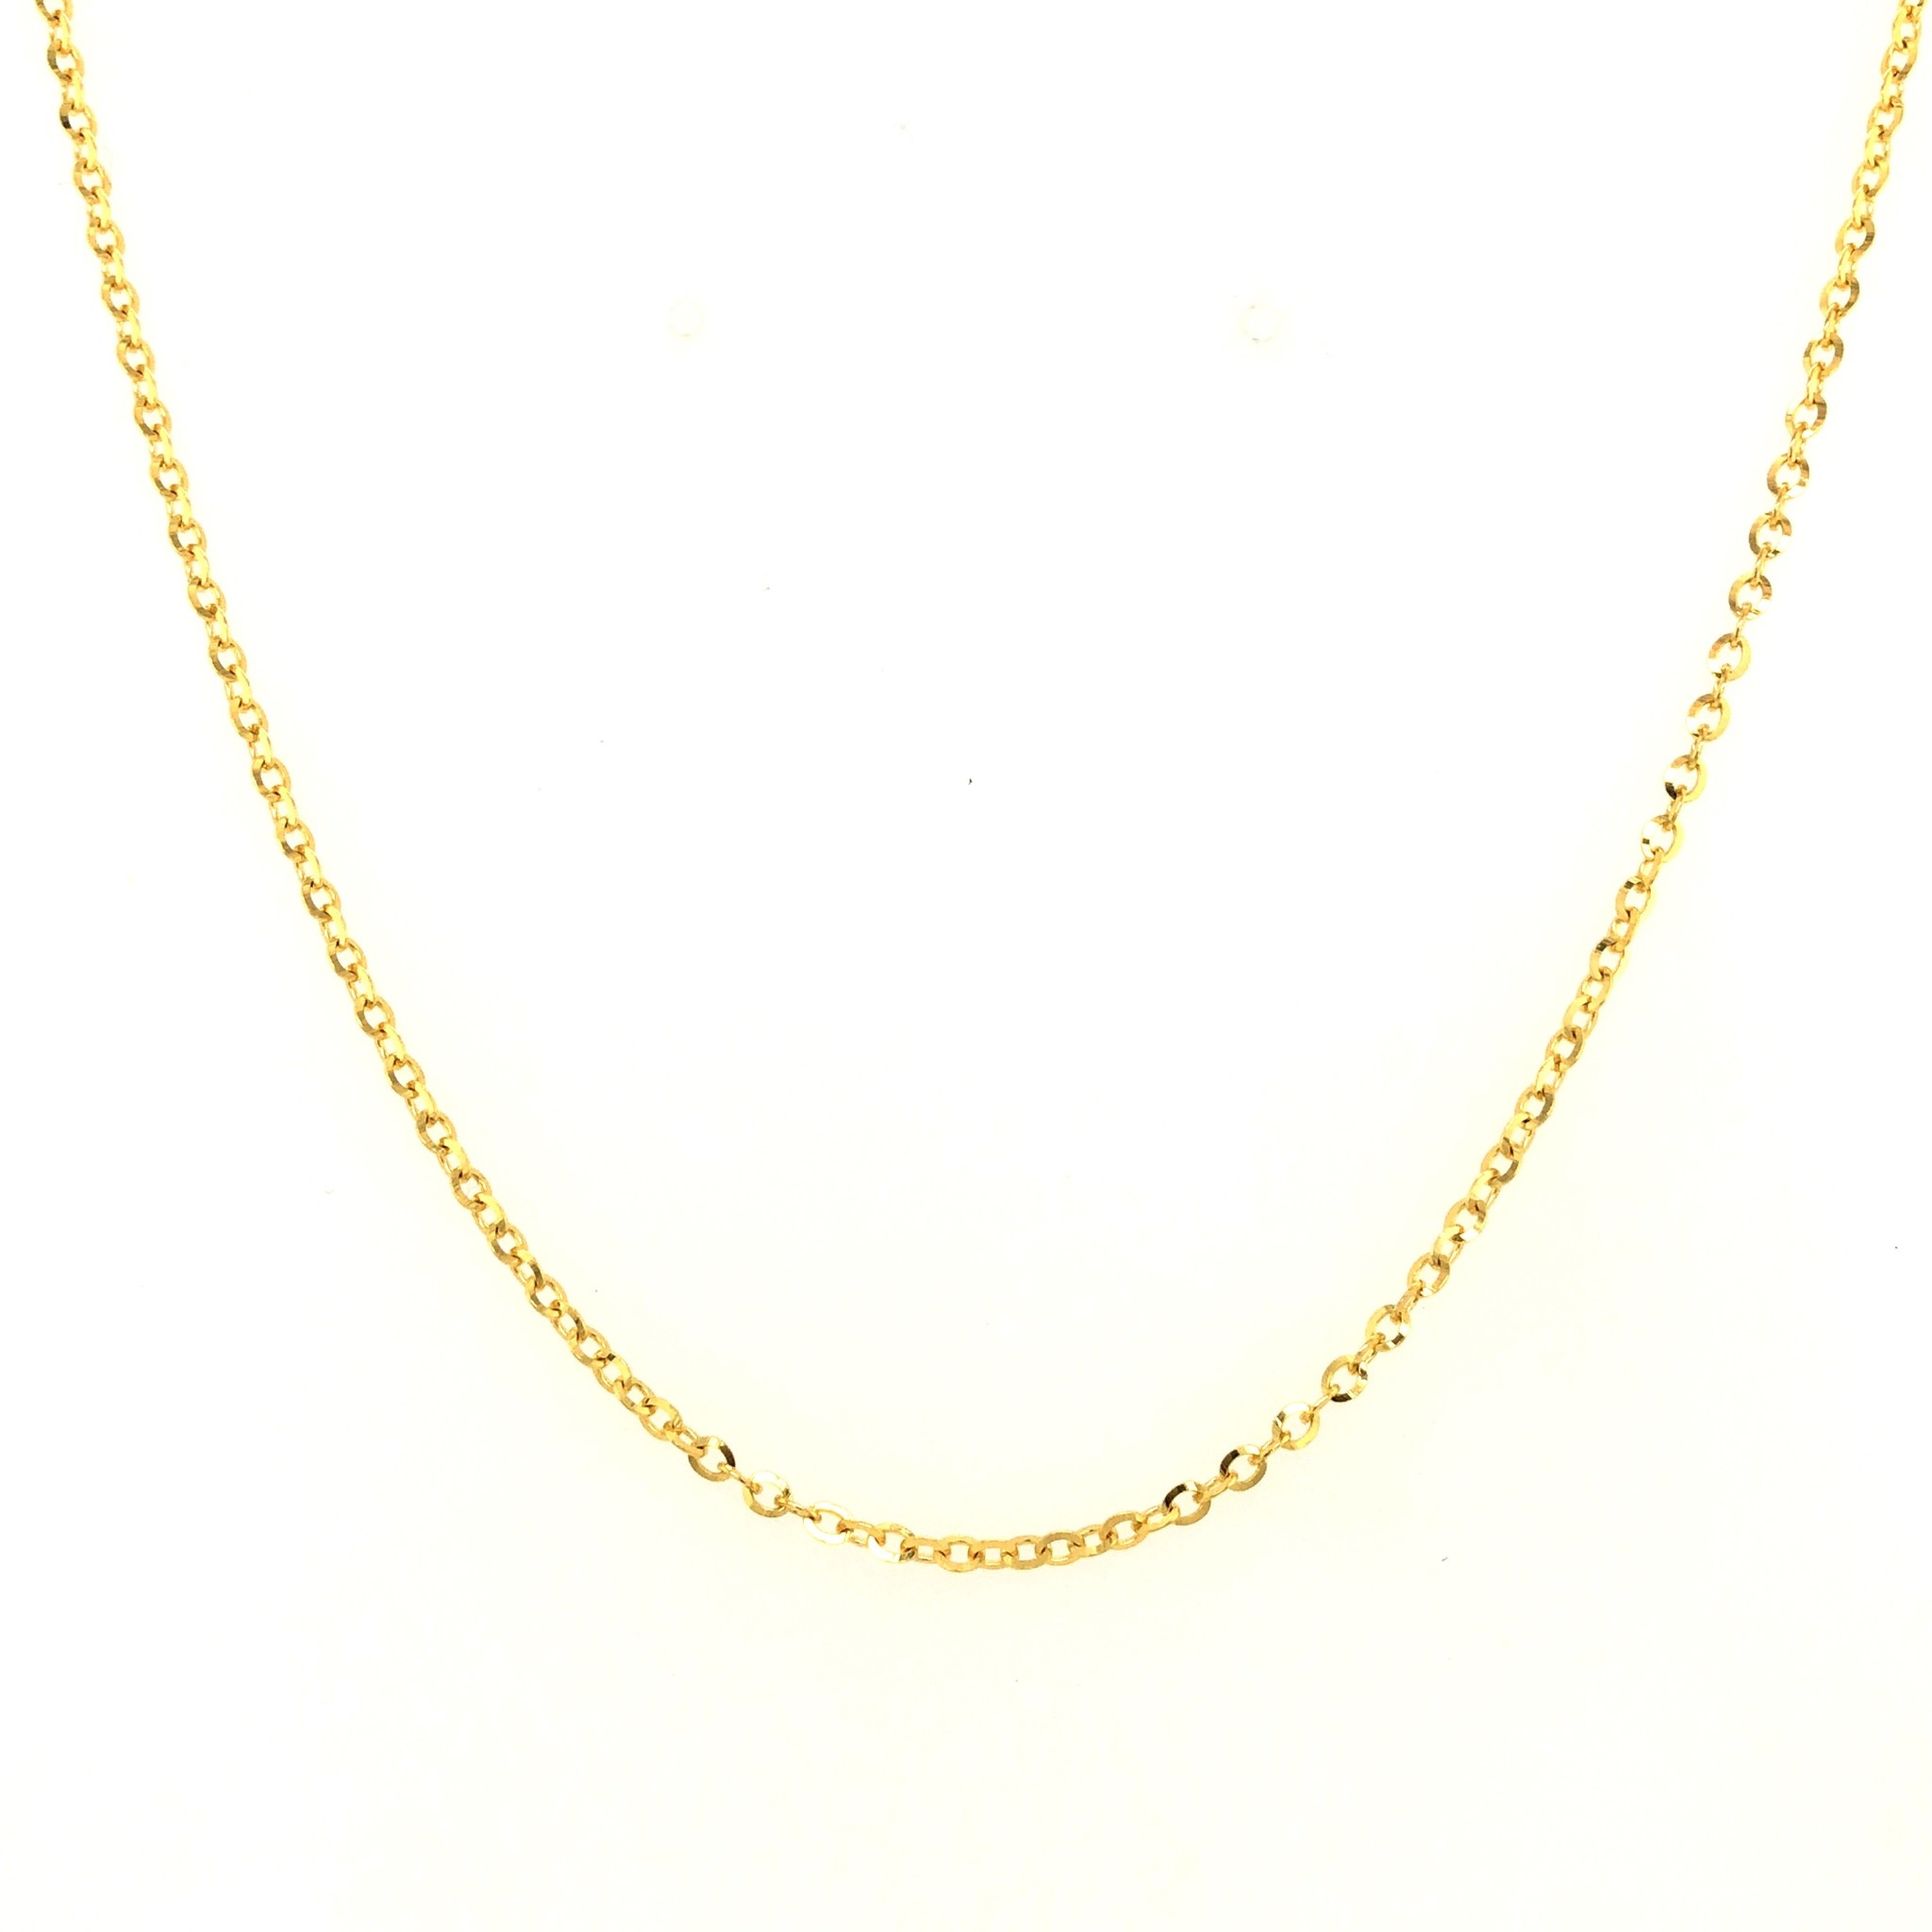 50139 18K YELLOW GOLD 18" CABLE LINK CHAIN